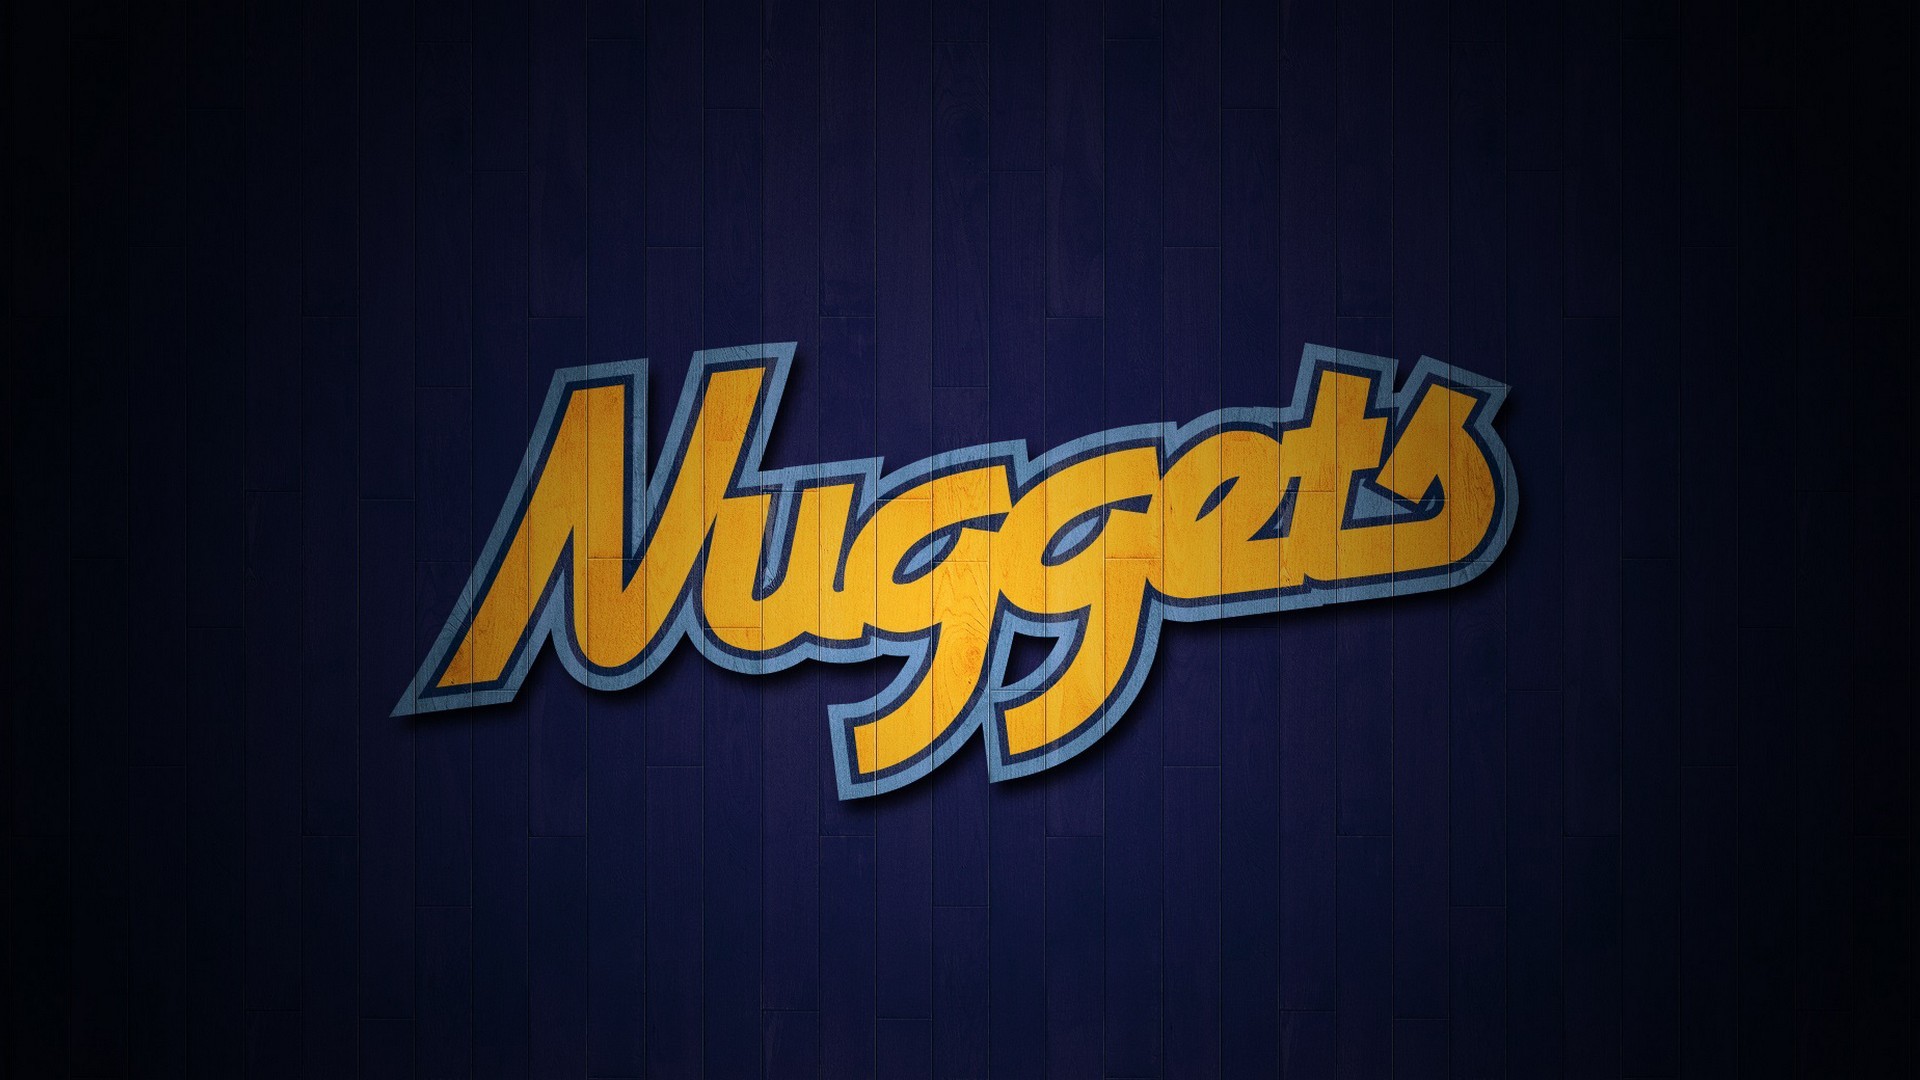 Denver Nuggets For PC Wallpaper with high-resolution 1920x1080 pixel. You can use this wallpaper for your Desktop Computer Backgrounds, Windows or Mac Screensavers, iPhone Lock screen, Tablet or Android and another Mobile Phone device